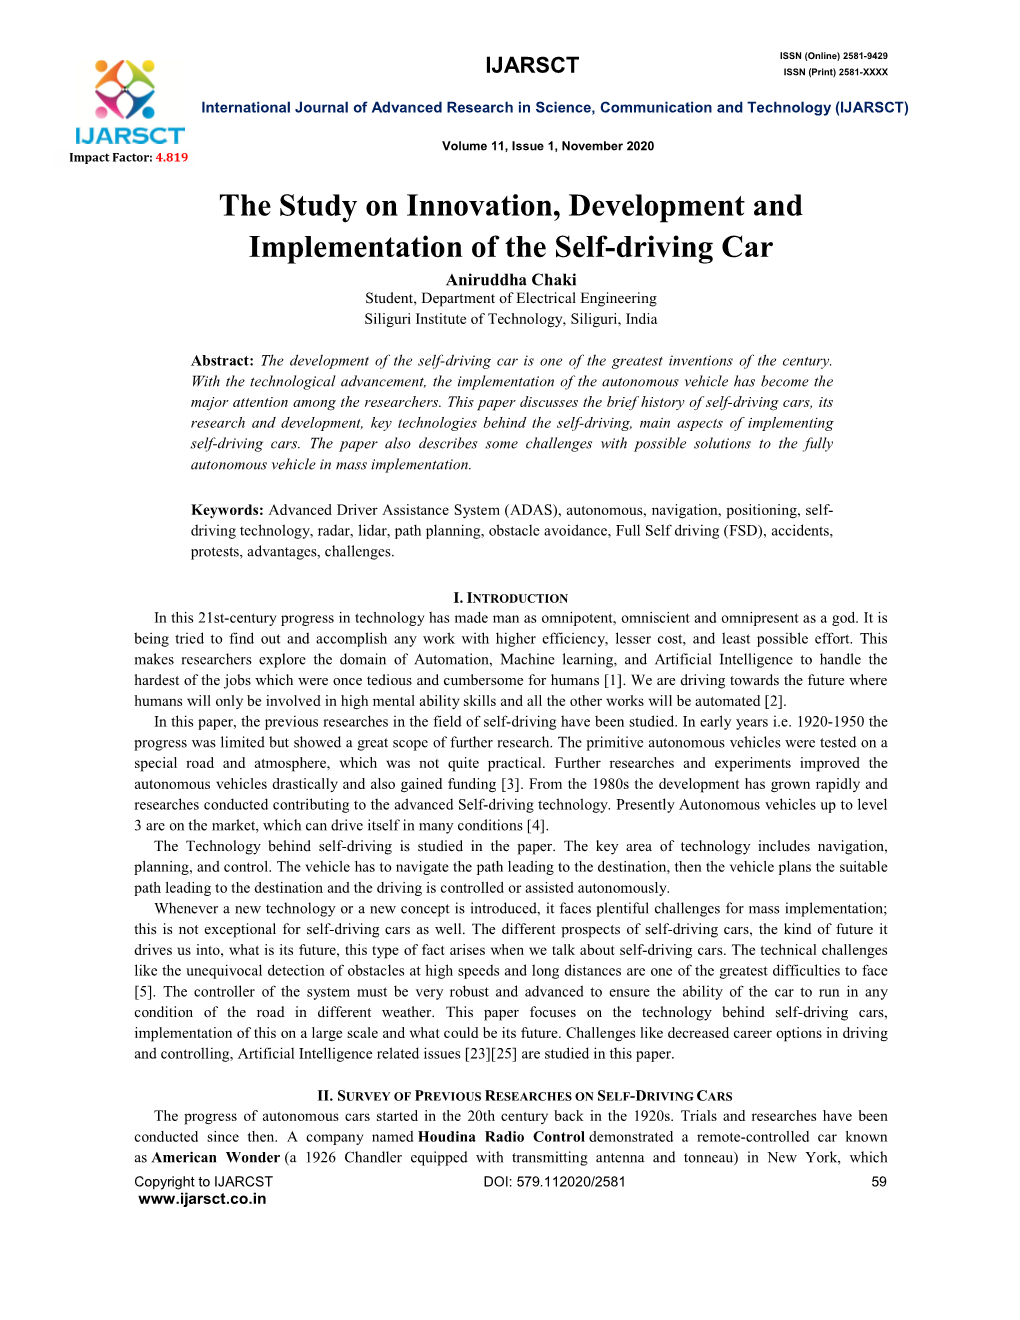 The Study on Innovation, Development and Implementation